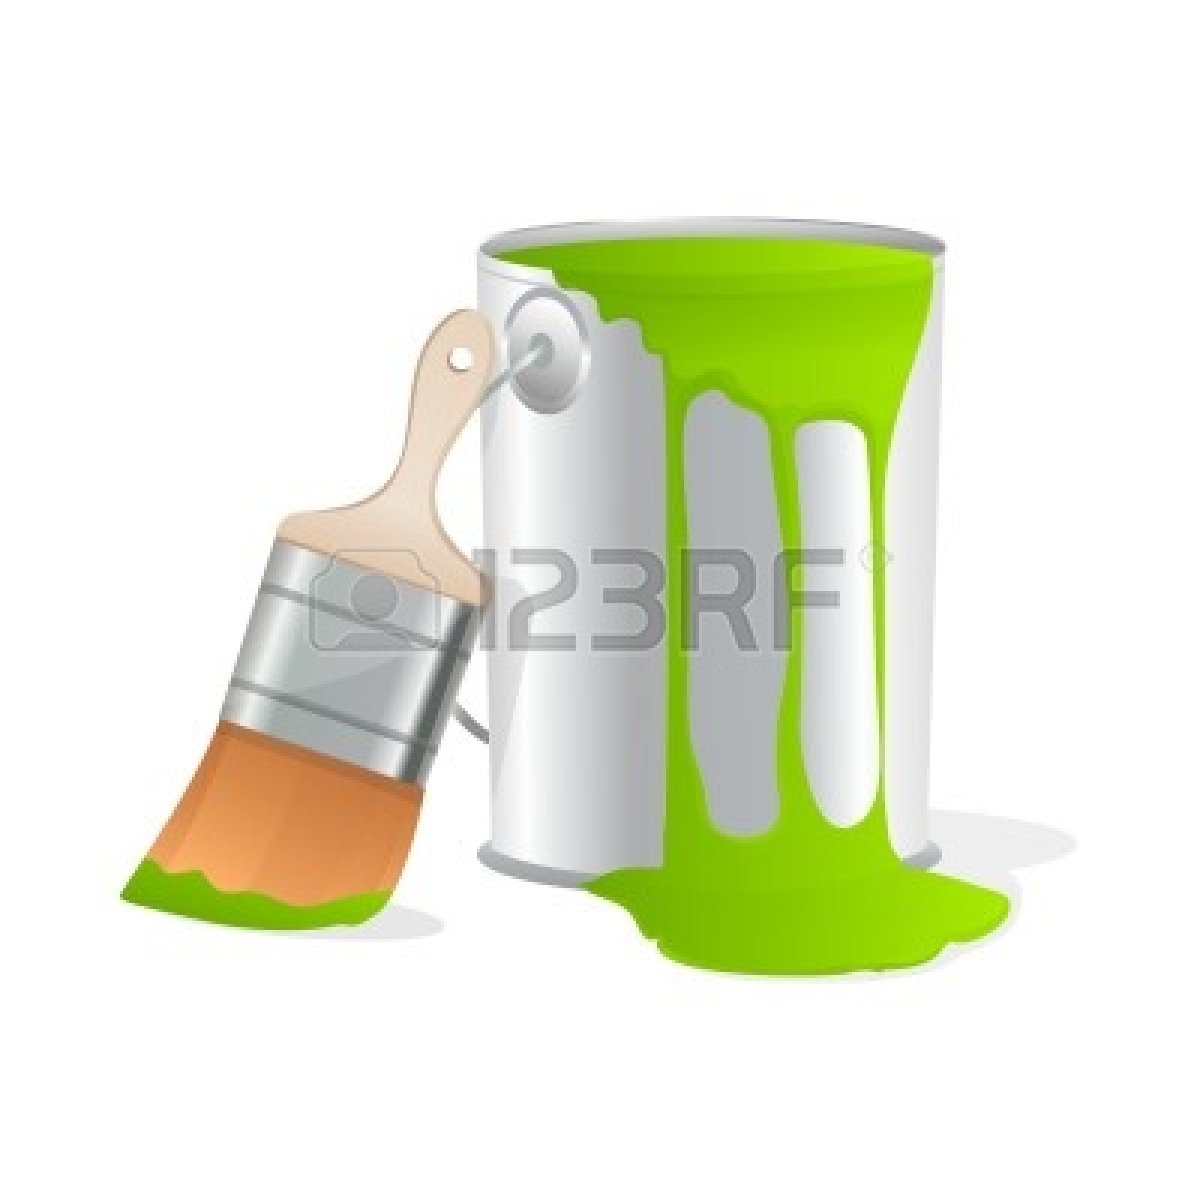 Paint Bucket Clip Art Black And White   Clipart Panda   Free Clipart